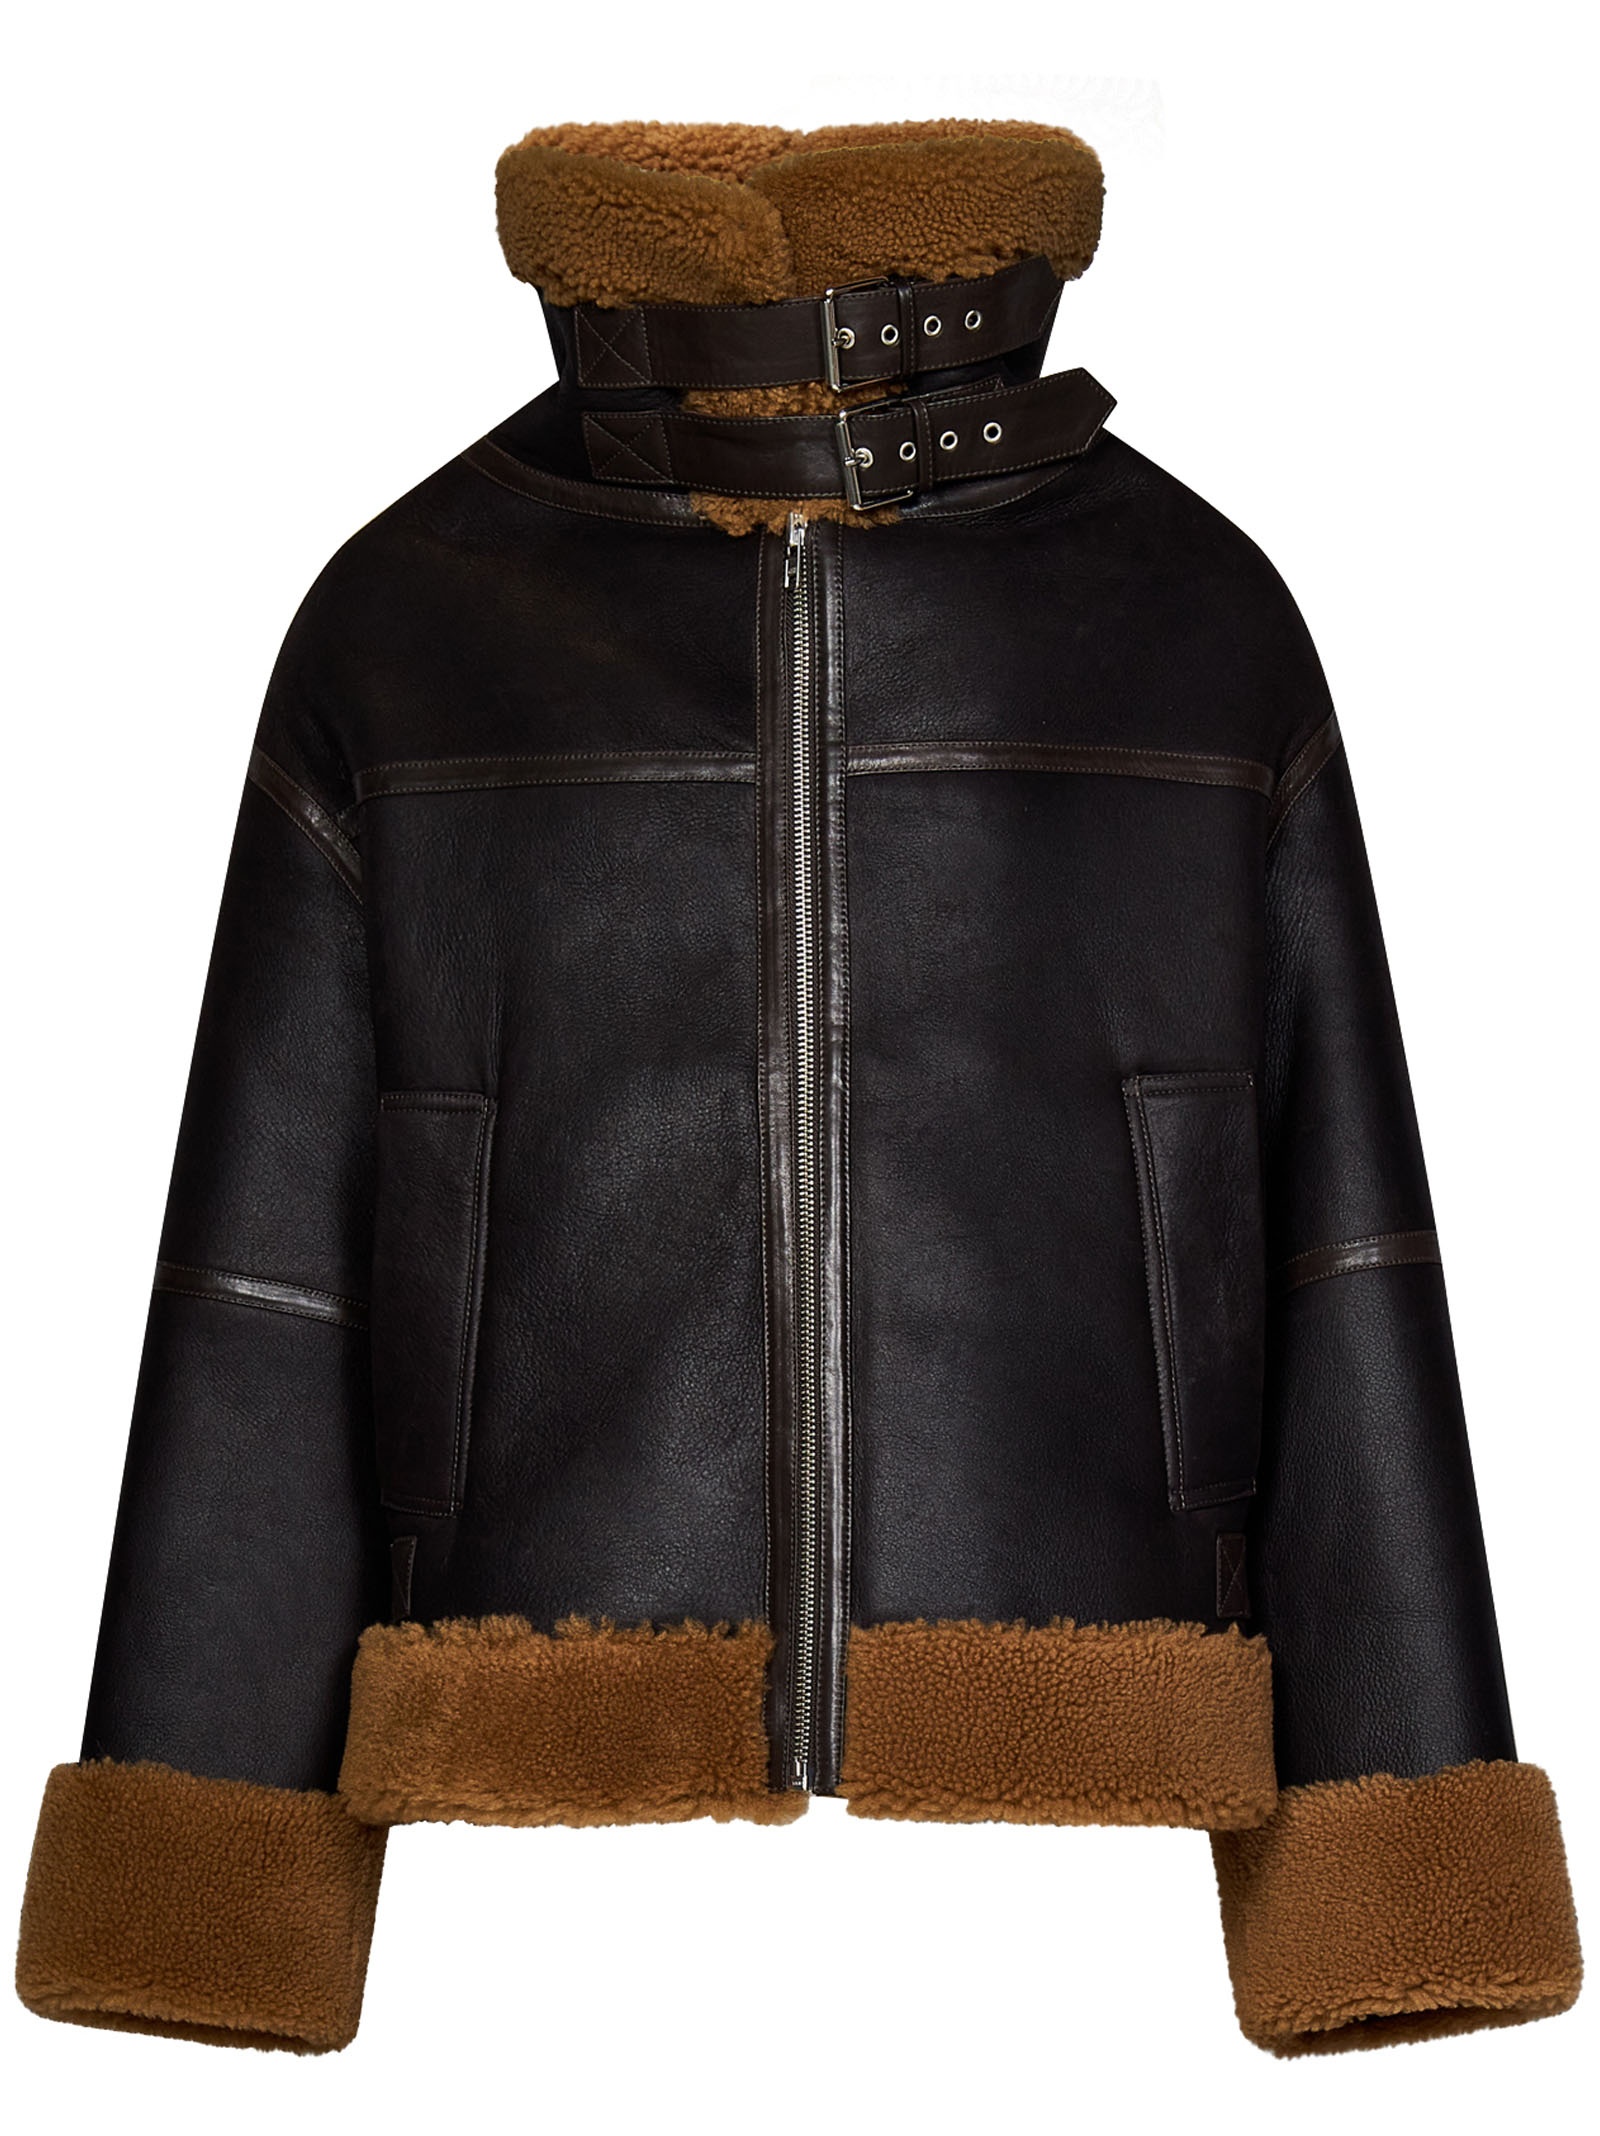 Dark brown leather jacket with brown shearling hem, collar and cuffs. - 1